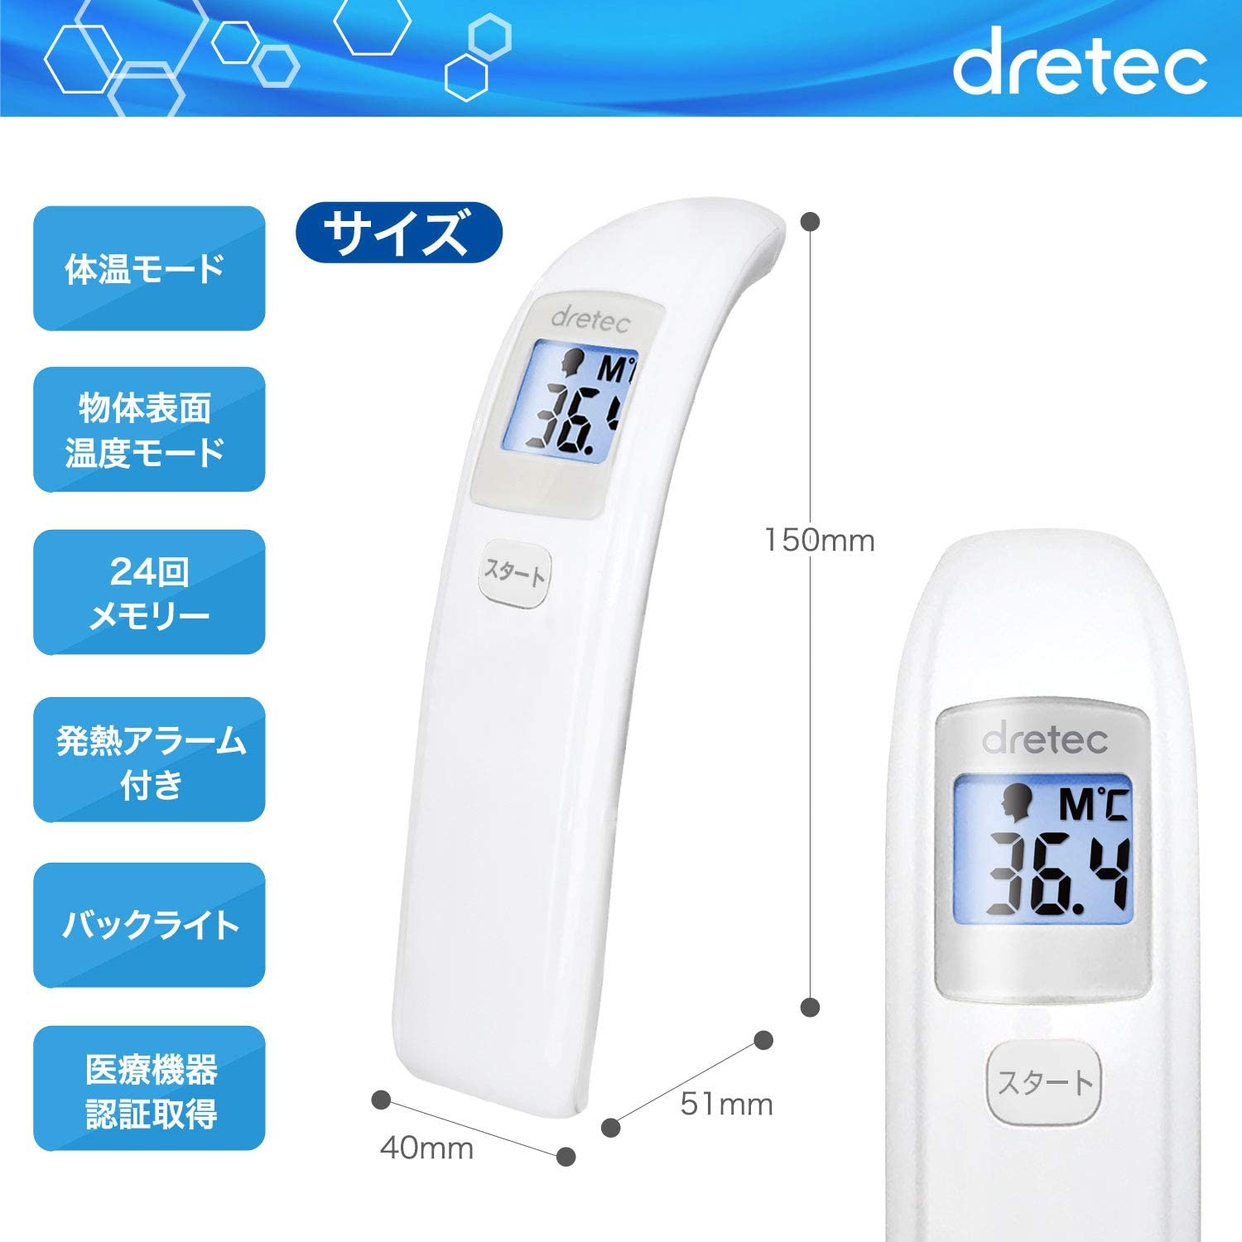 dretec(ドリテック) 非接触体温計 TO-401の商品画像サムネ7 